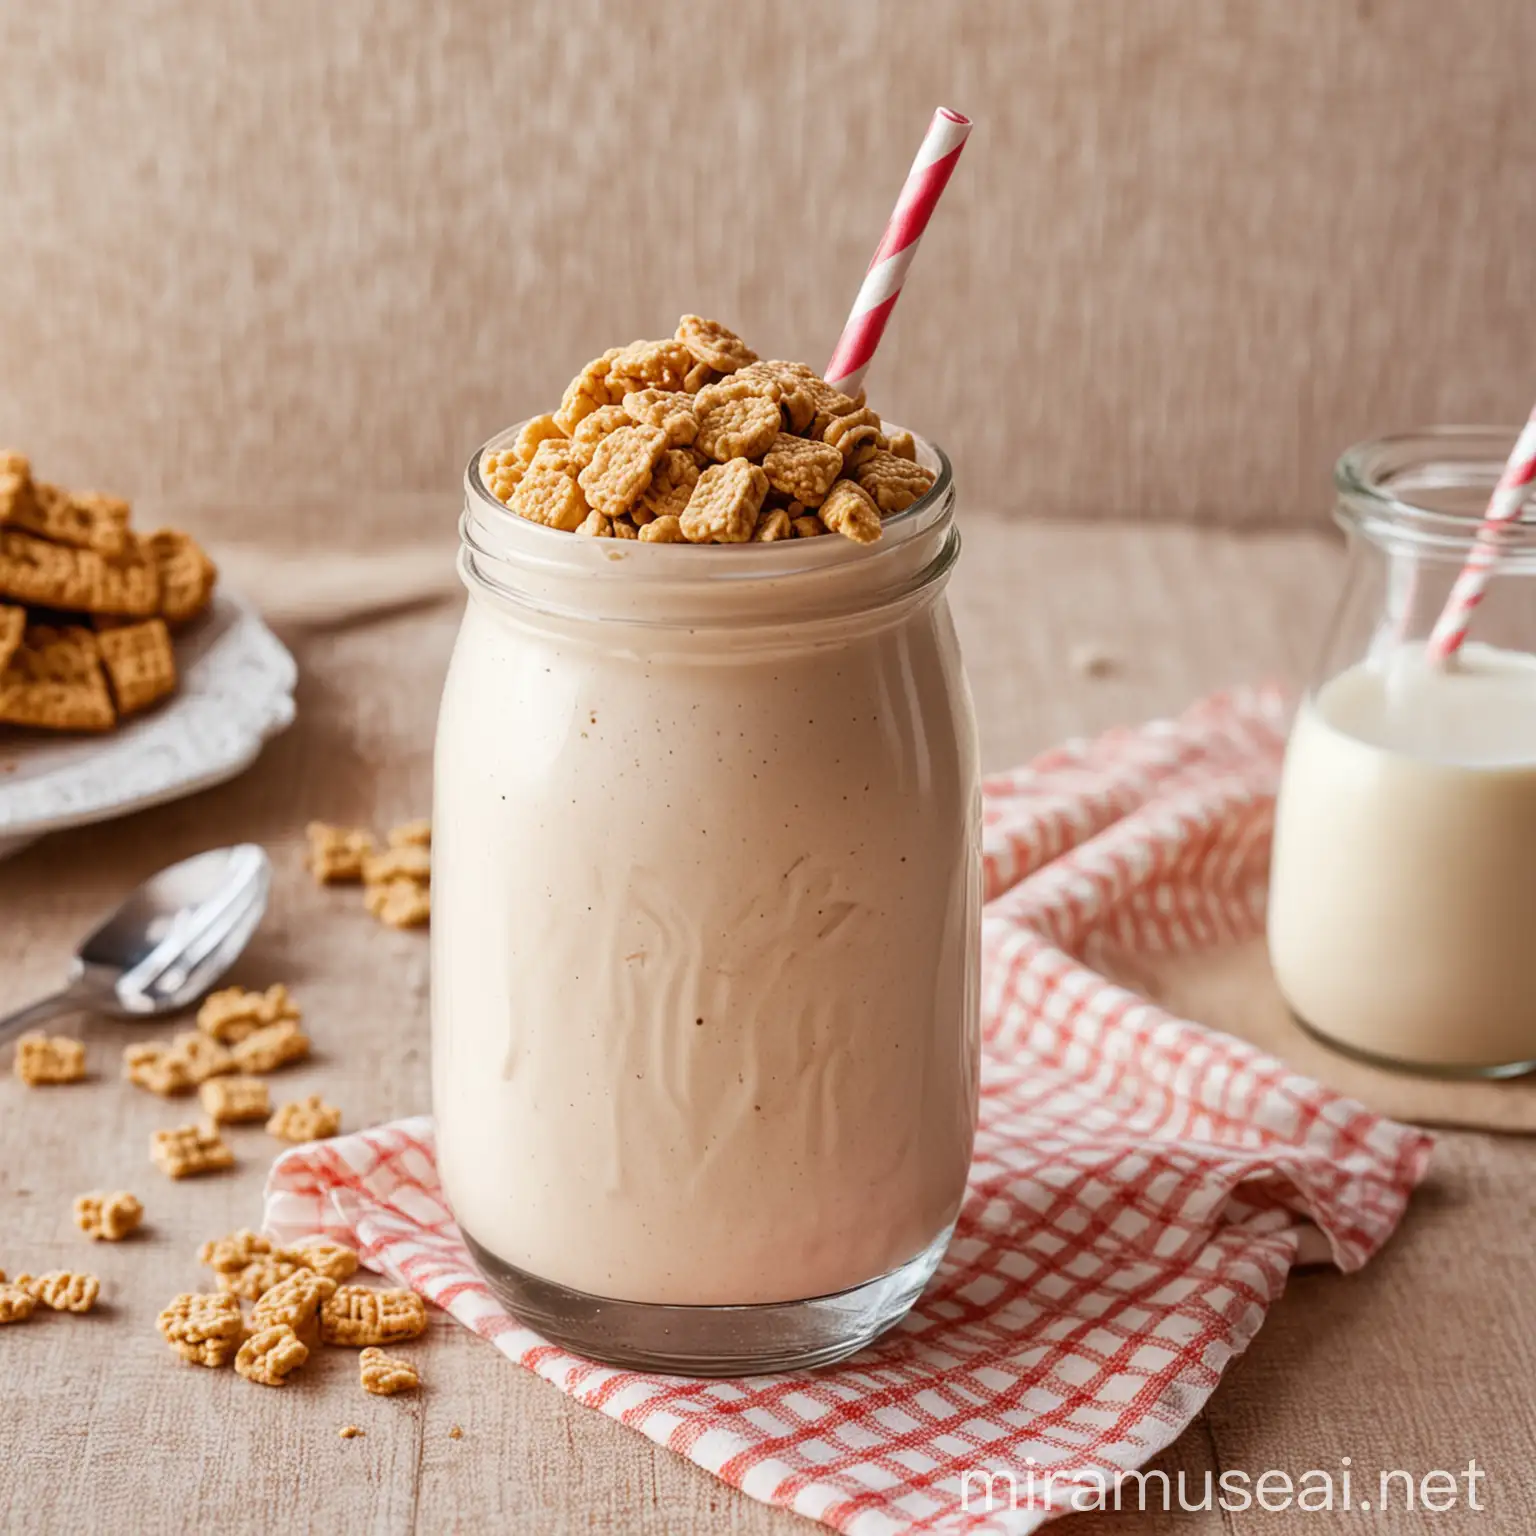 Cereal milkshake in a bottle on a table with a nice tablecloth